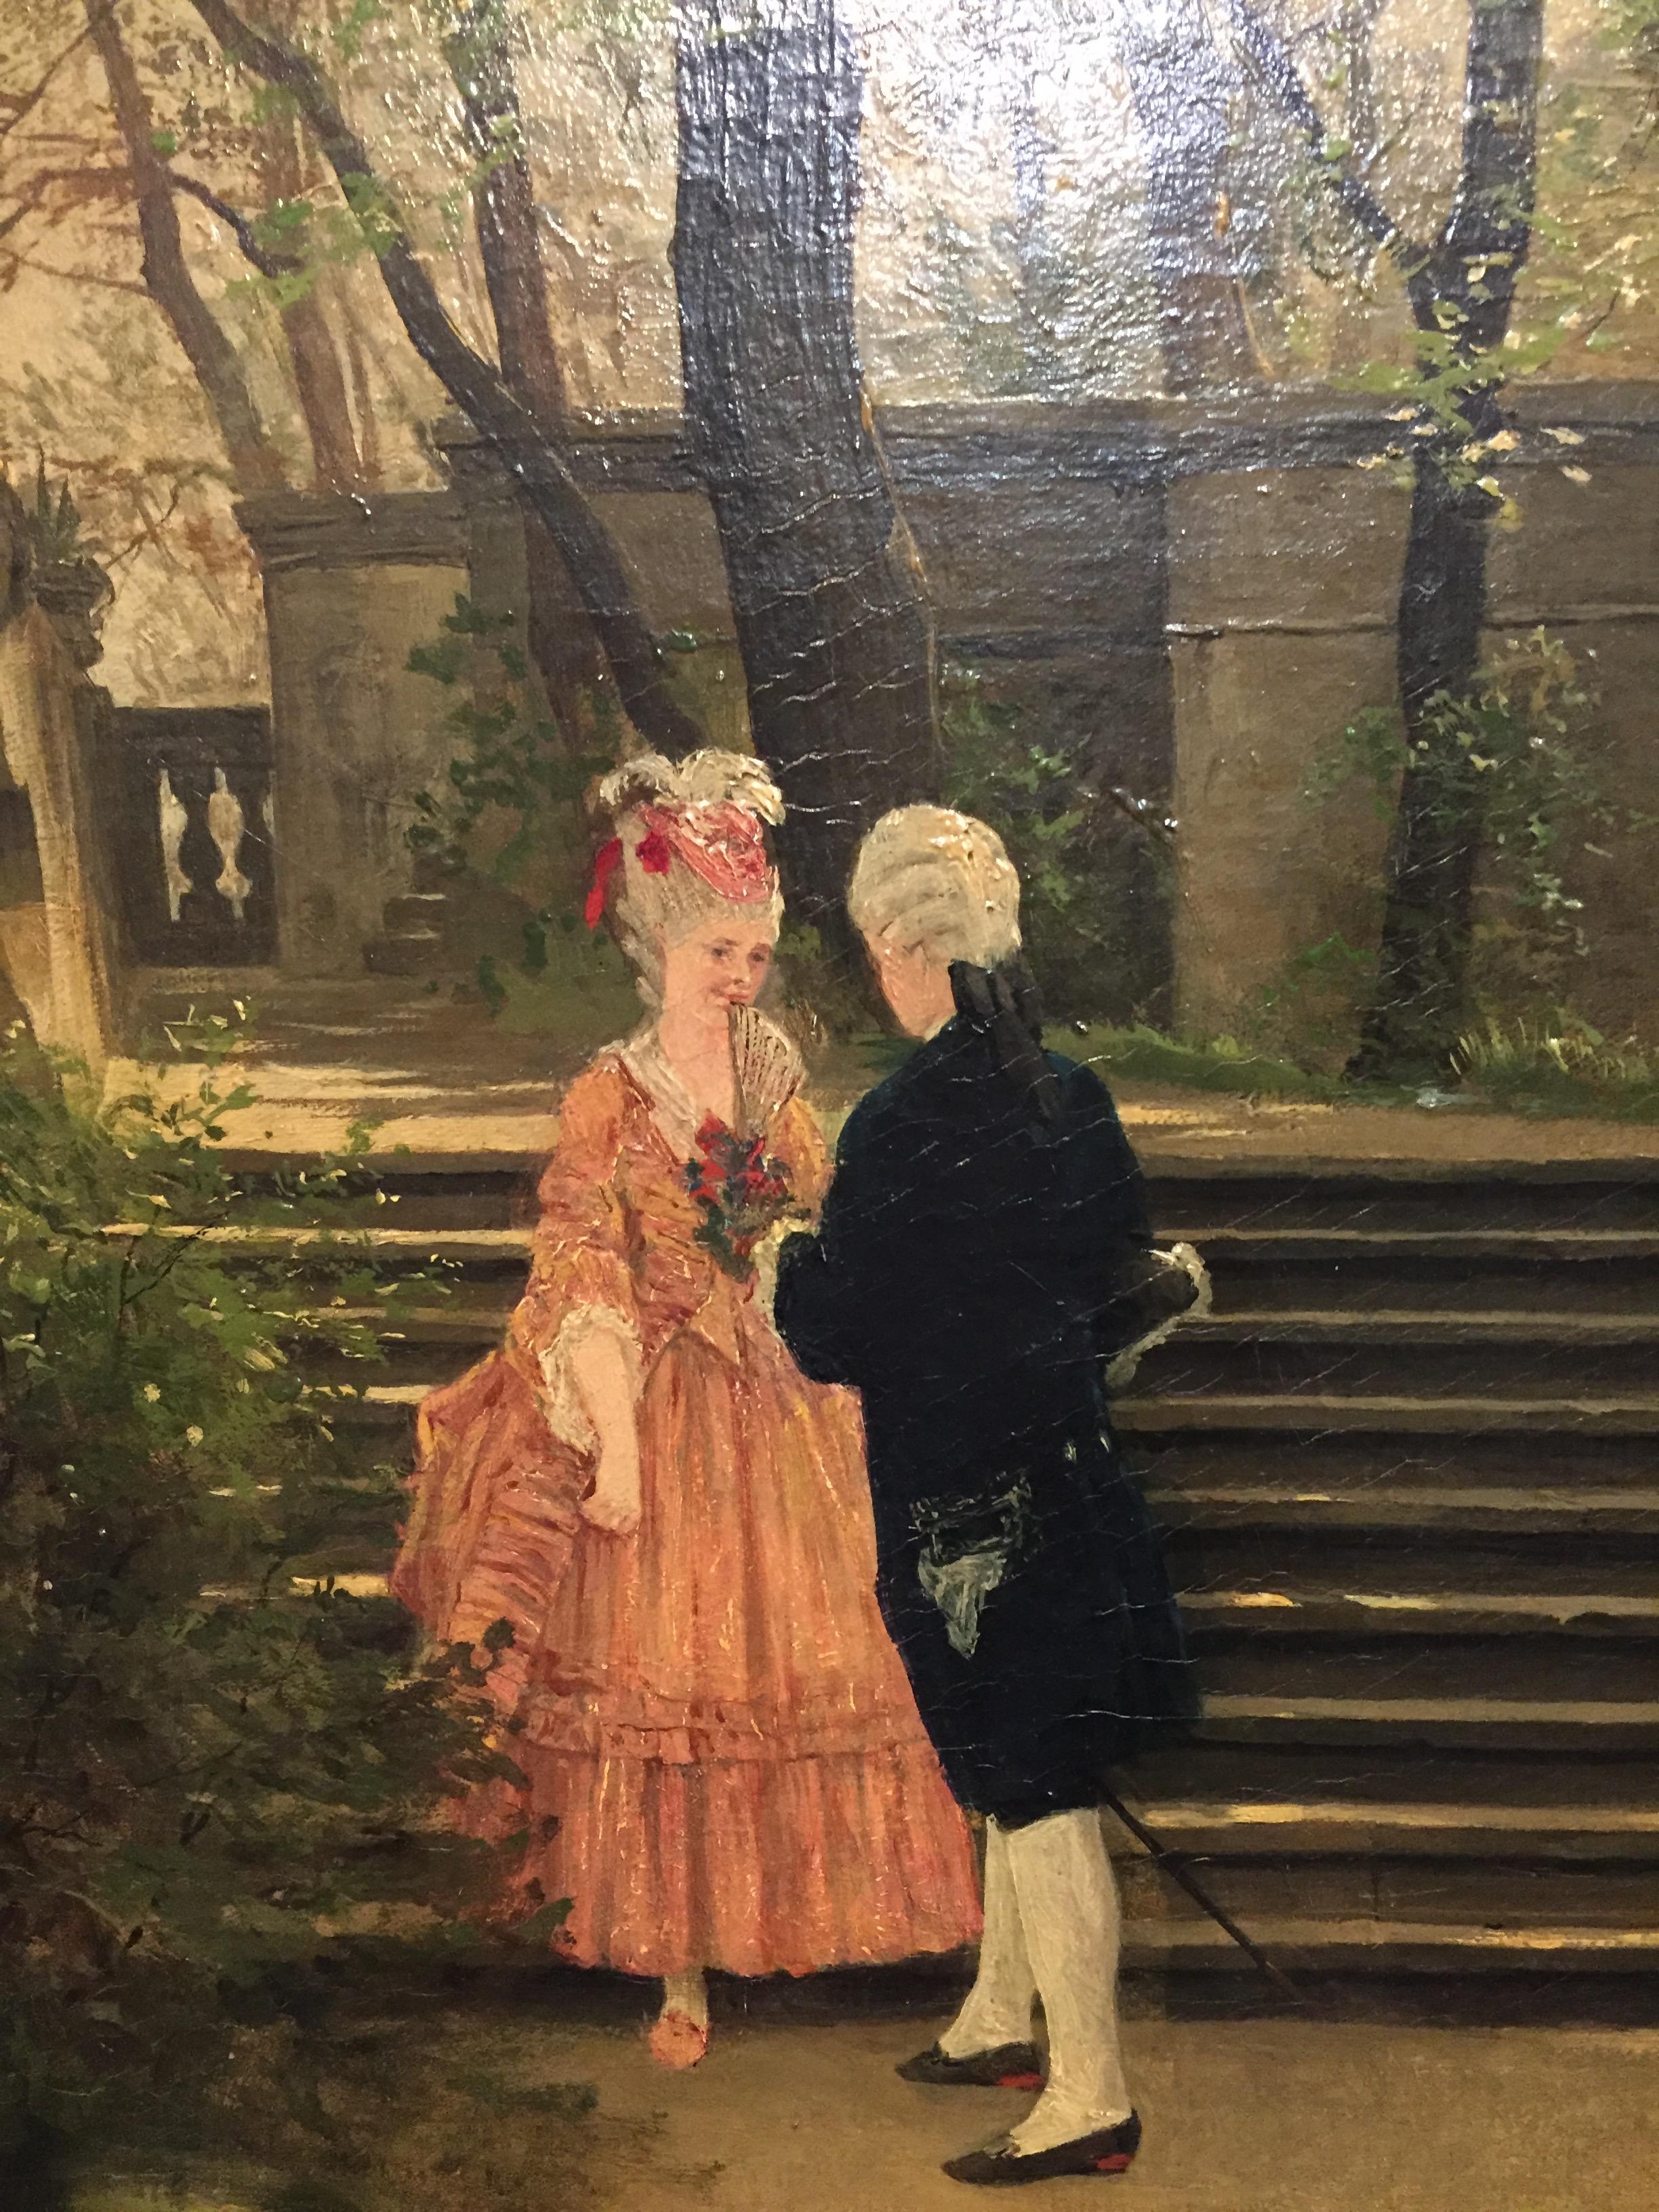 19th Century Oil Painting by P. F. Flickel in the Castle Garden